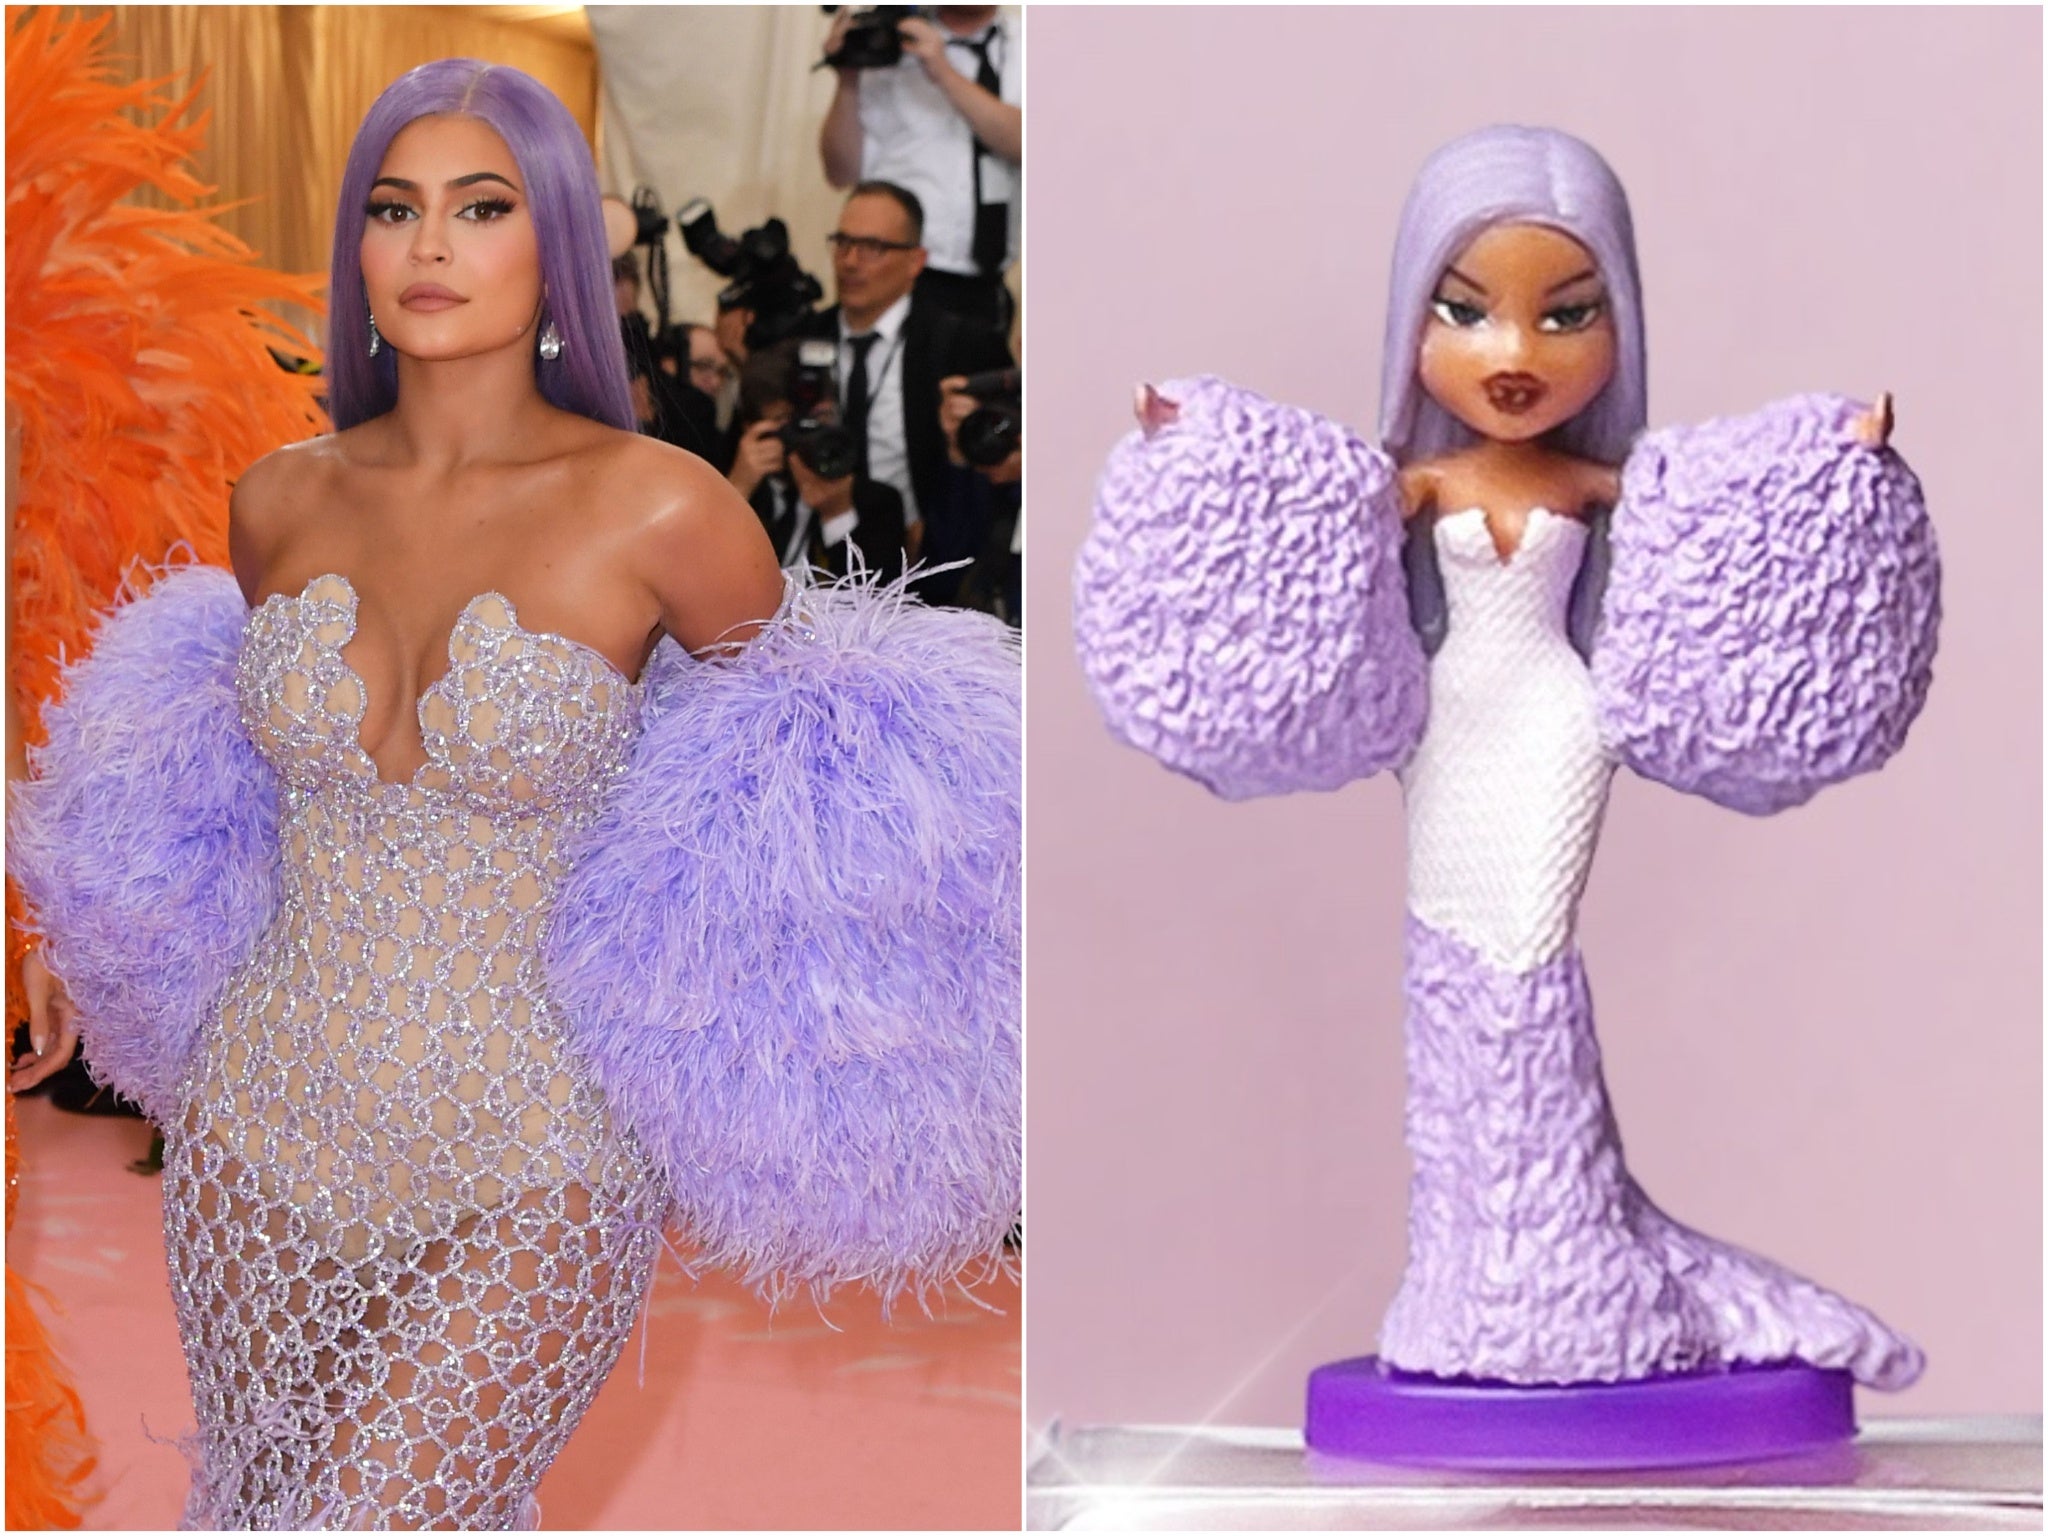 Kylie Jenner wearing Versace to the 2019 Met Gala and her Bratz doll